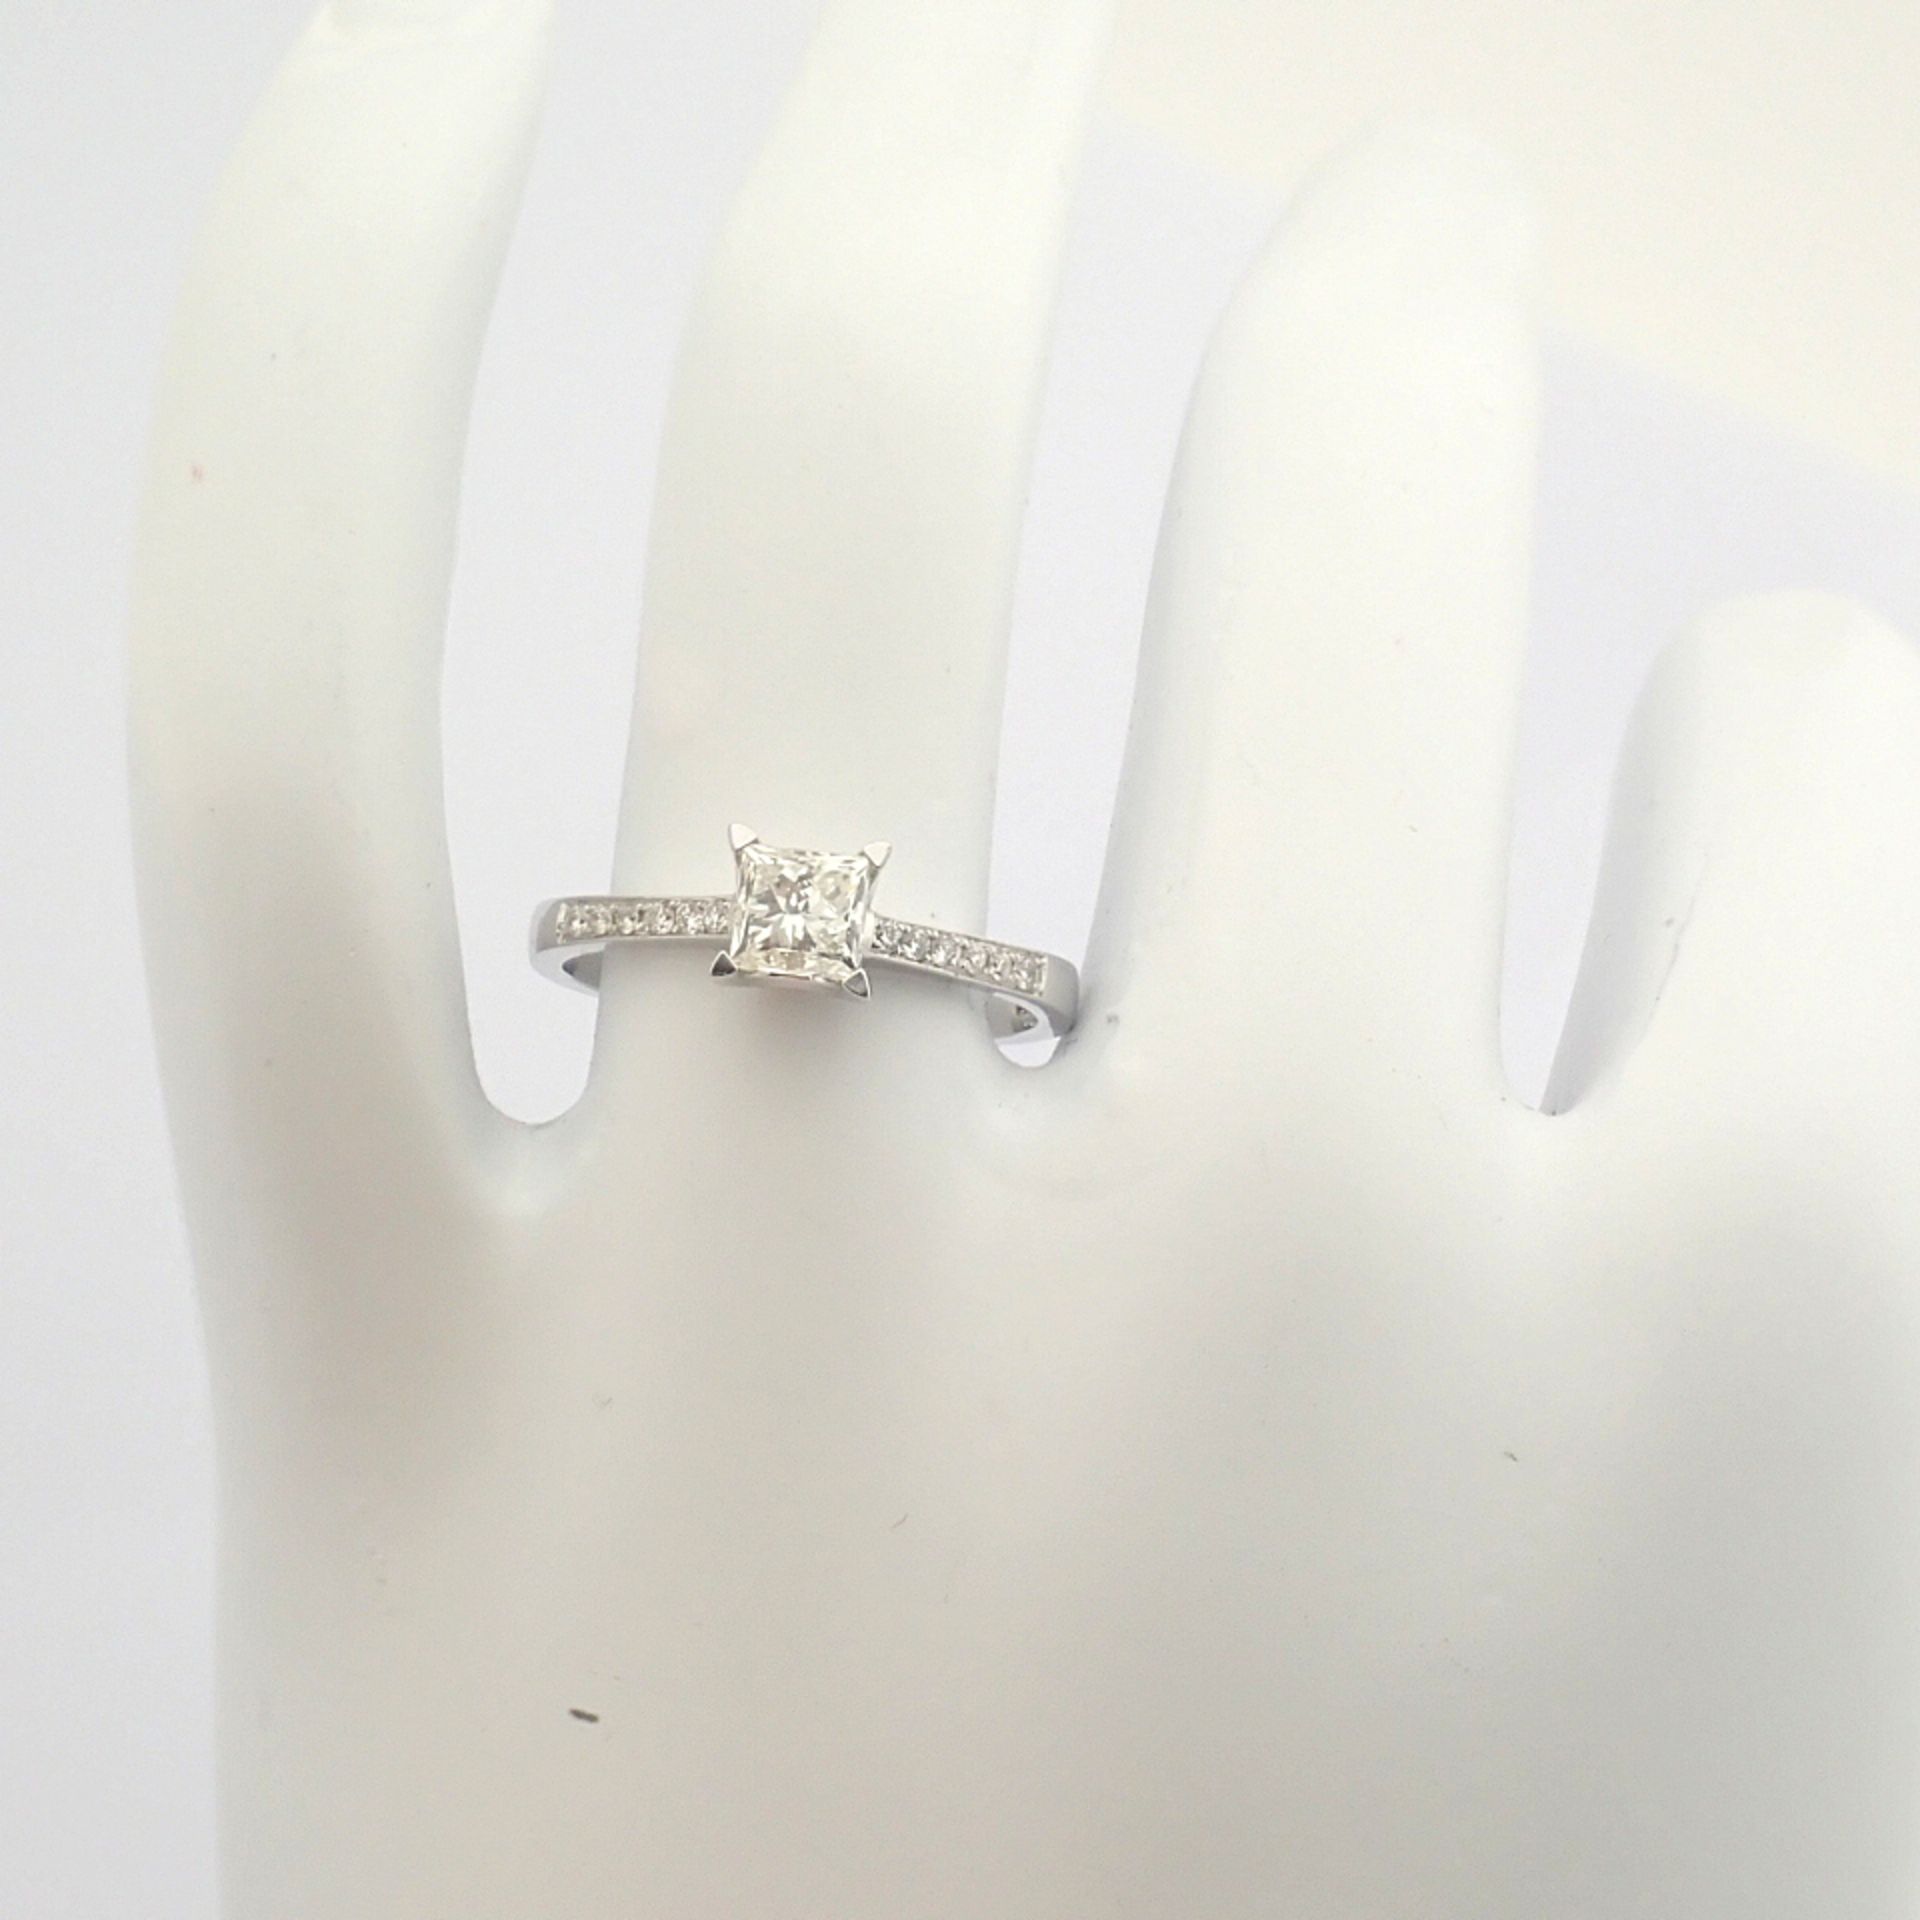 Certificated 18K White Gold Diamond Ring (Total 0.77 ct Stone) - Image 5 of 9